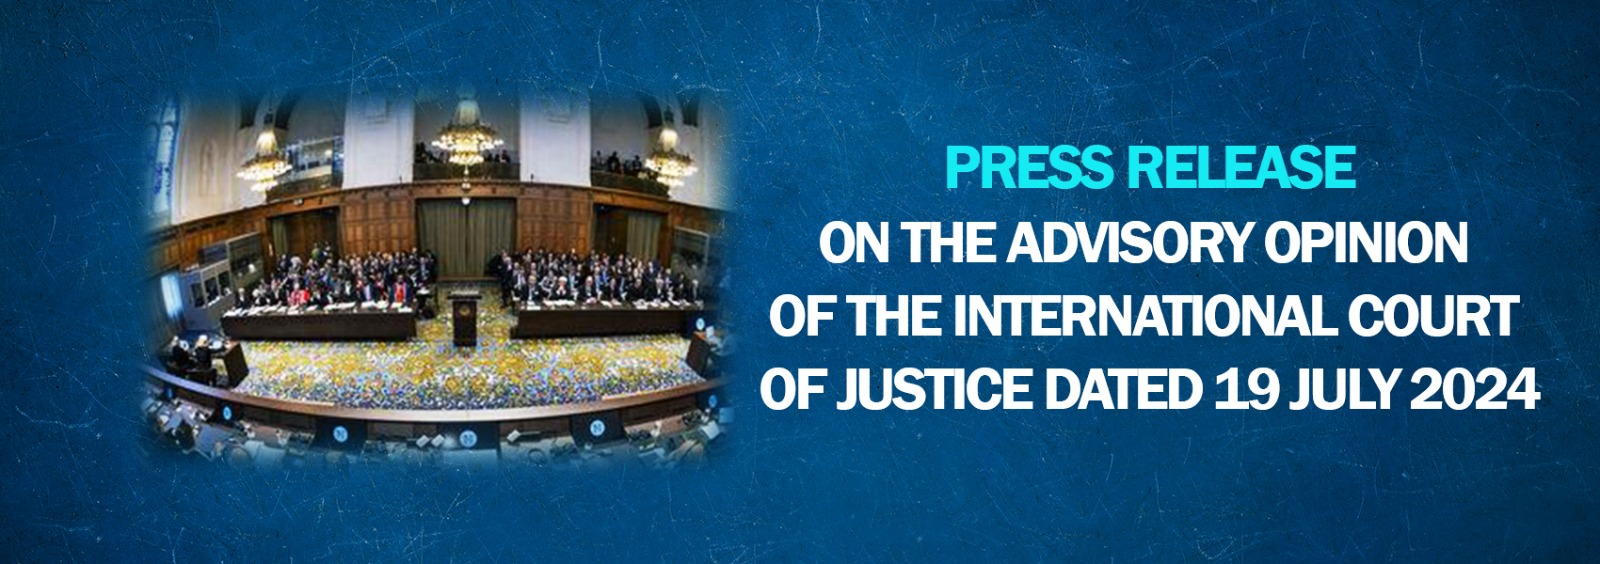 Press Release on the Advisory Opinion of the International Court of Justice dated 19 July 2024